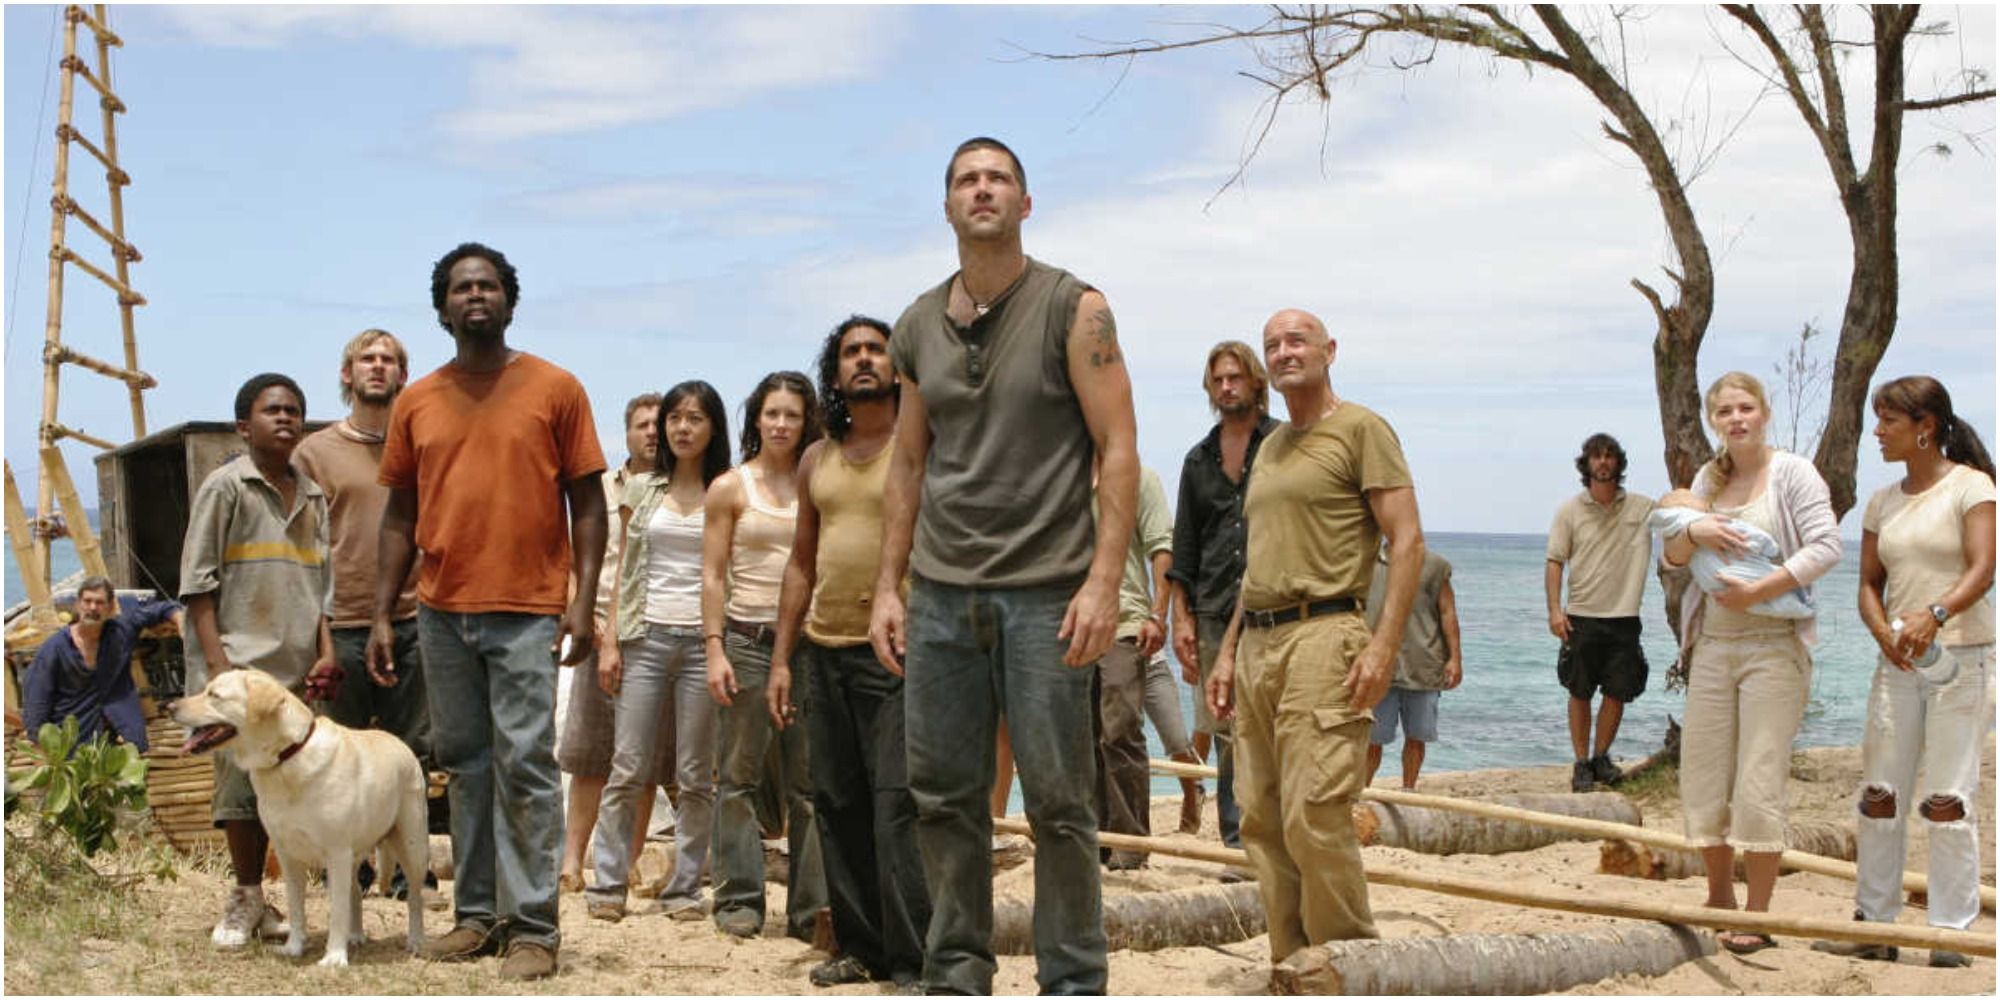 The cast of Lost standing on the beach